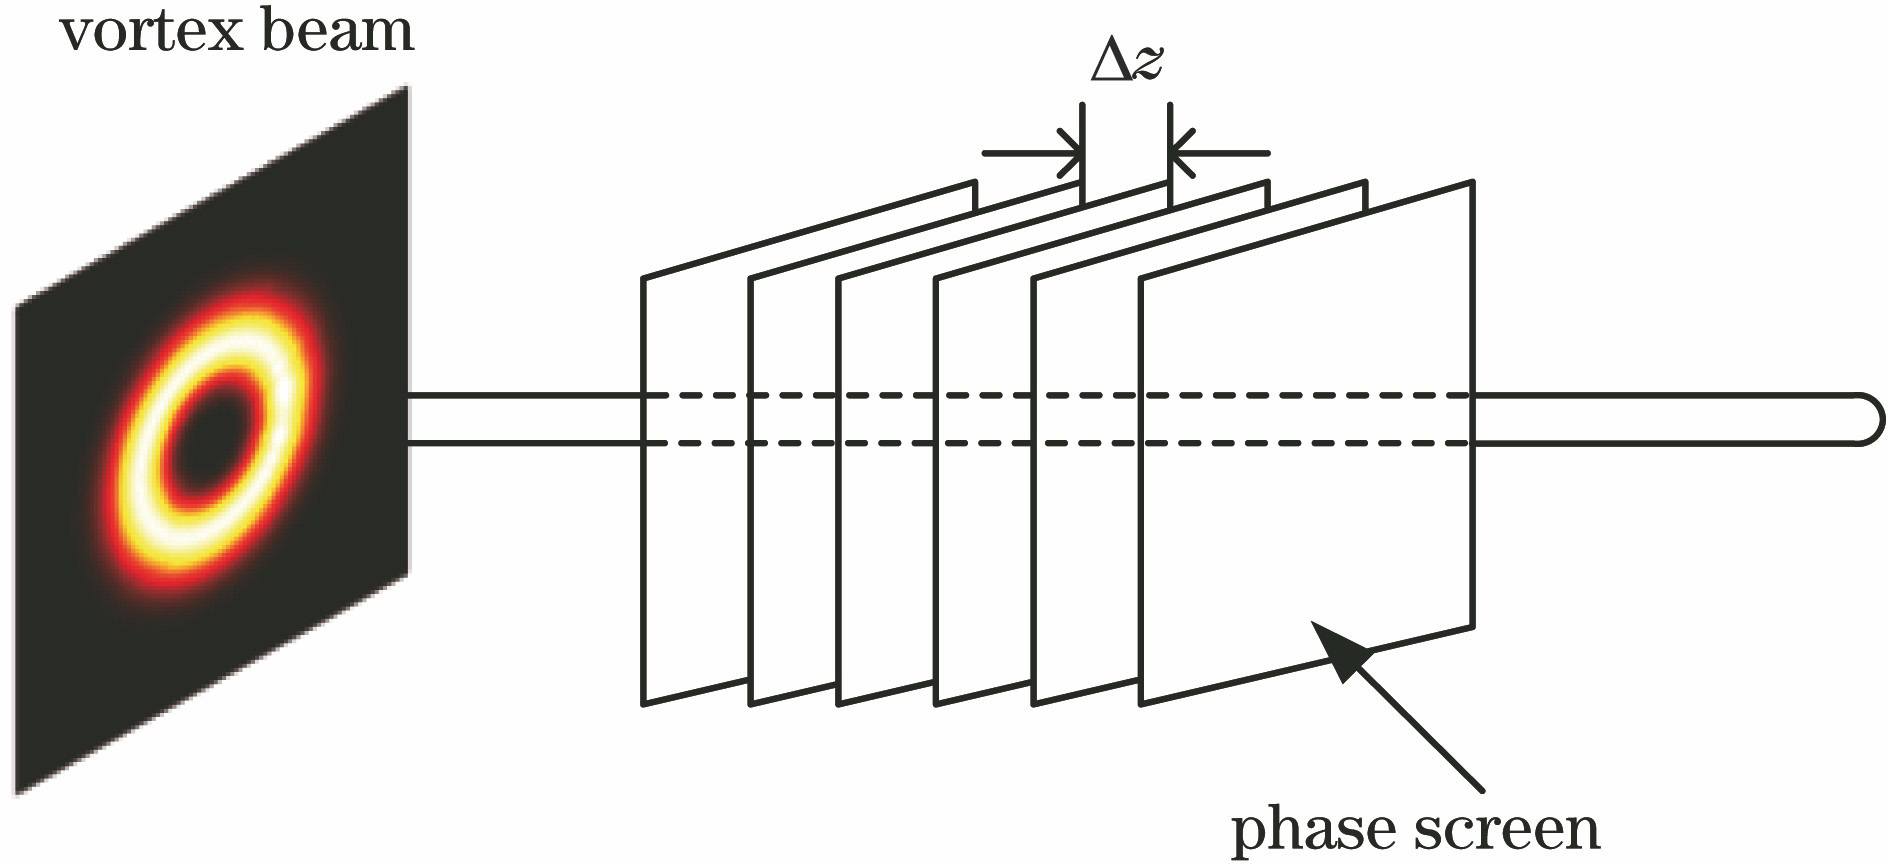 Model of multiple phase screens